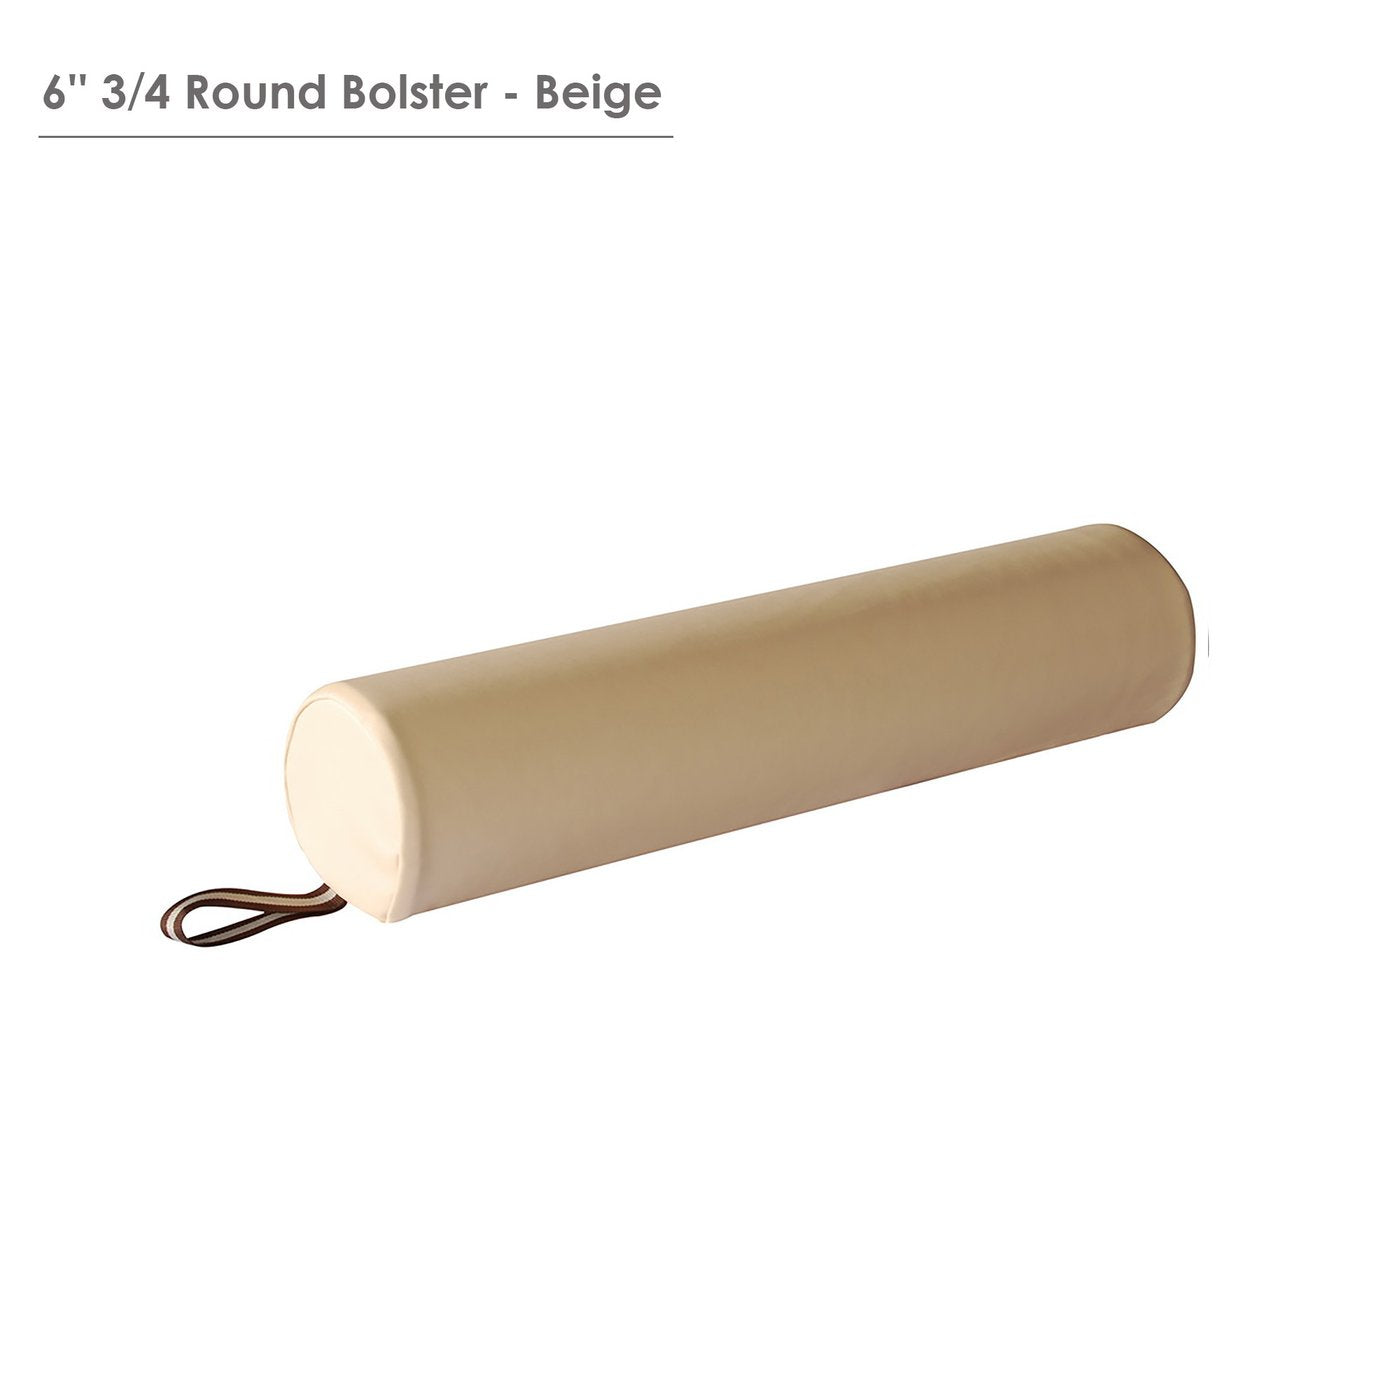 6" 3/4 Round Bolster for Massage Table